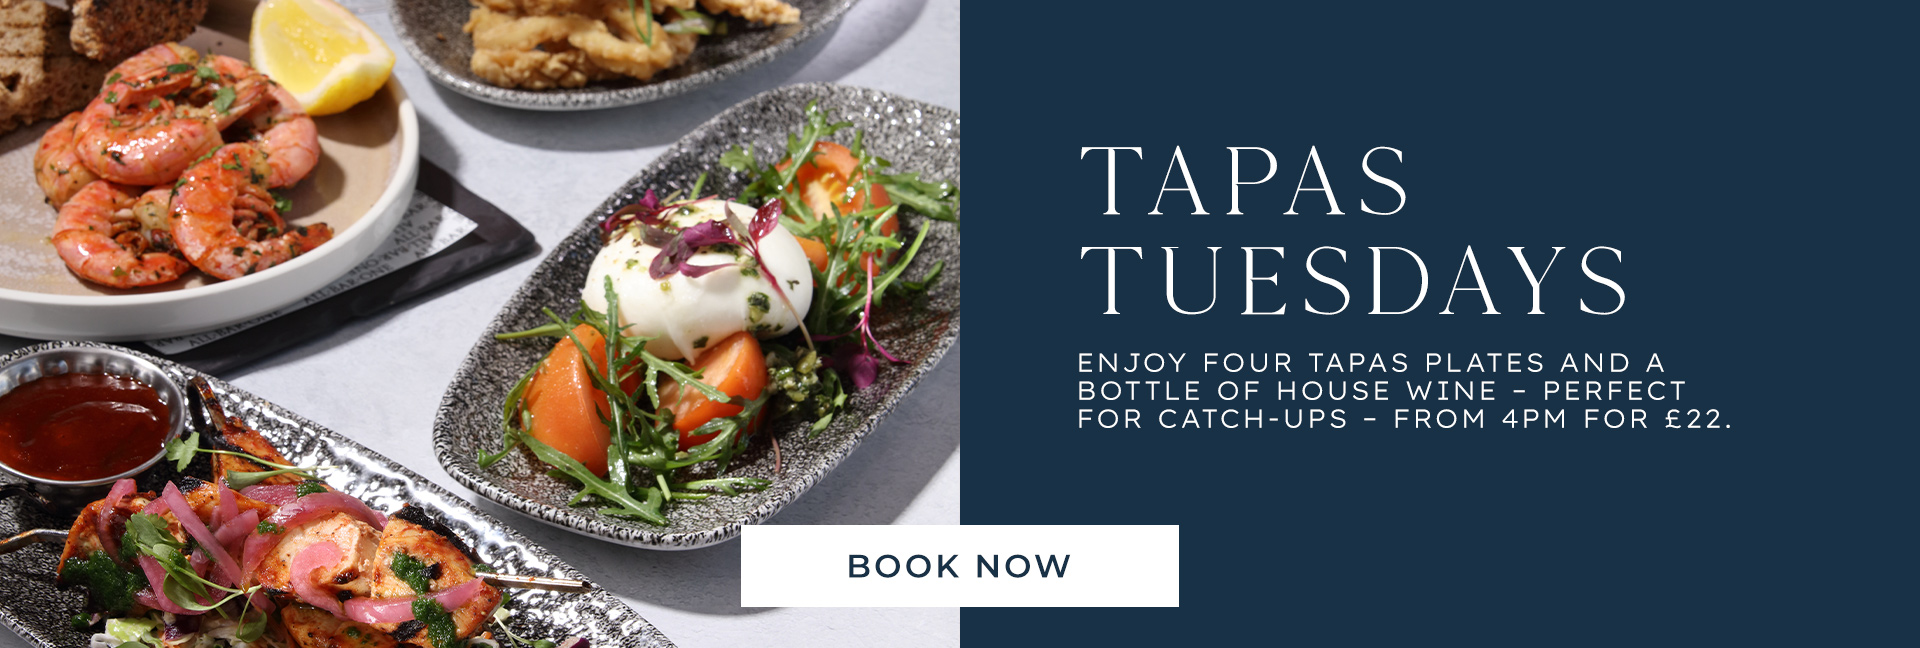 Tapas Tuesday at All Bar One Houndsditch - Book now